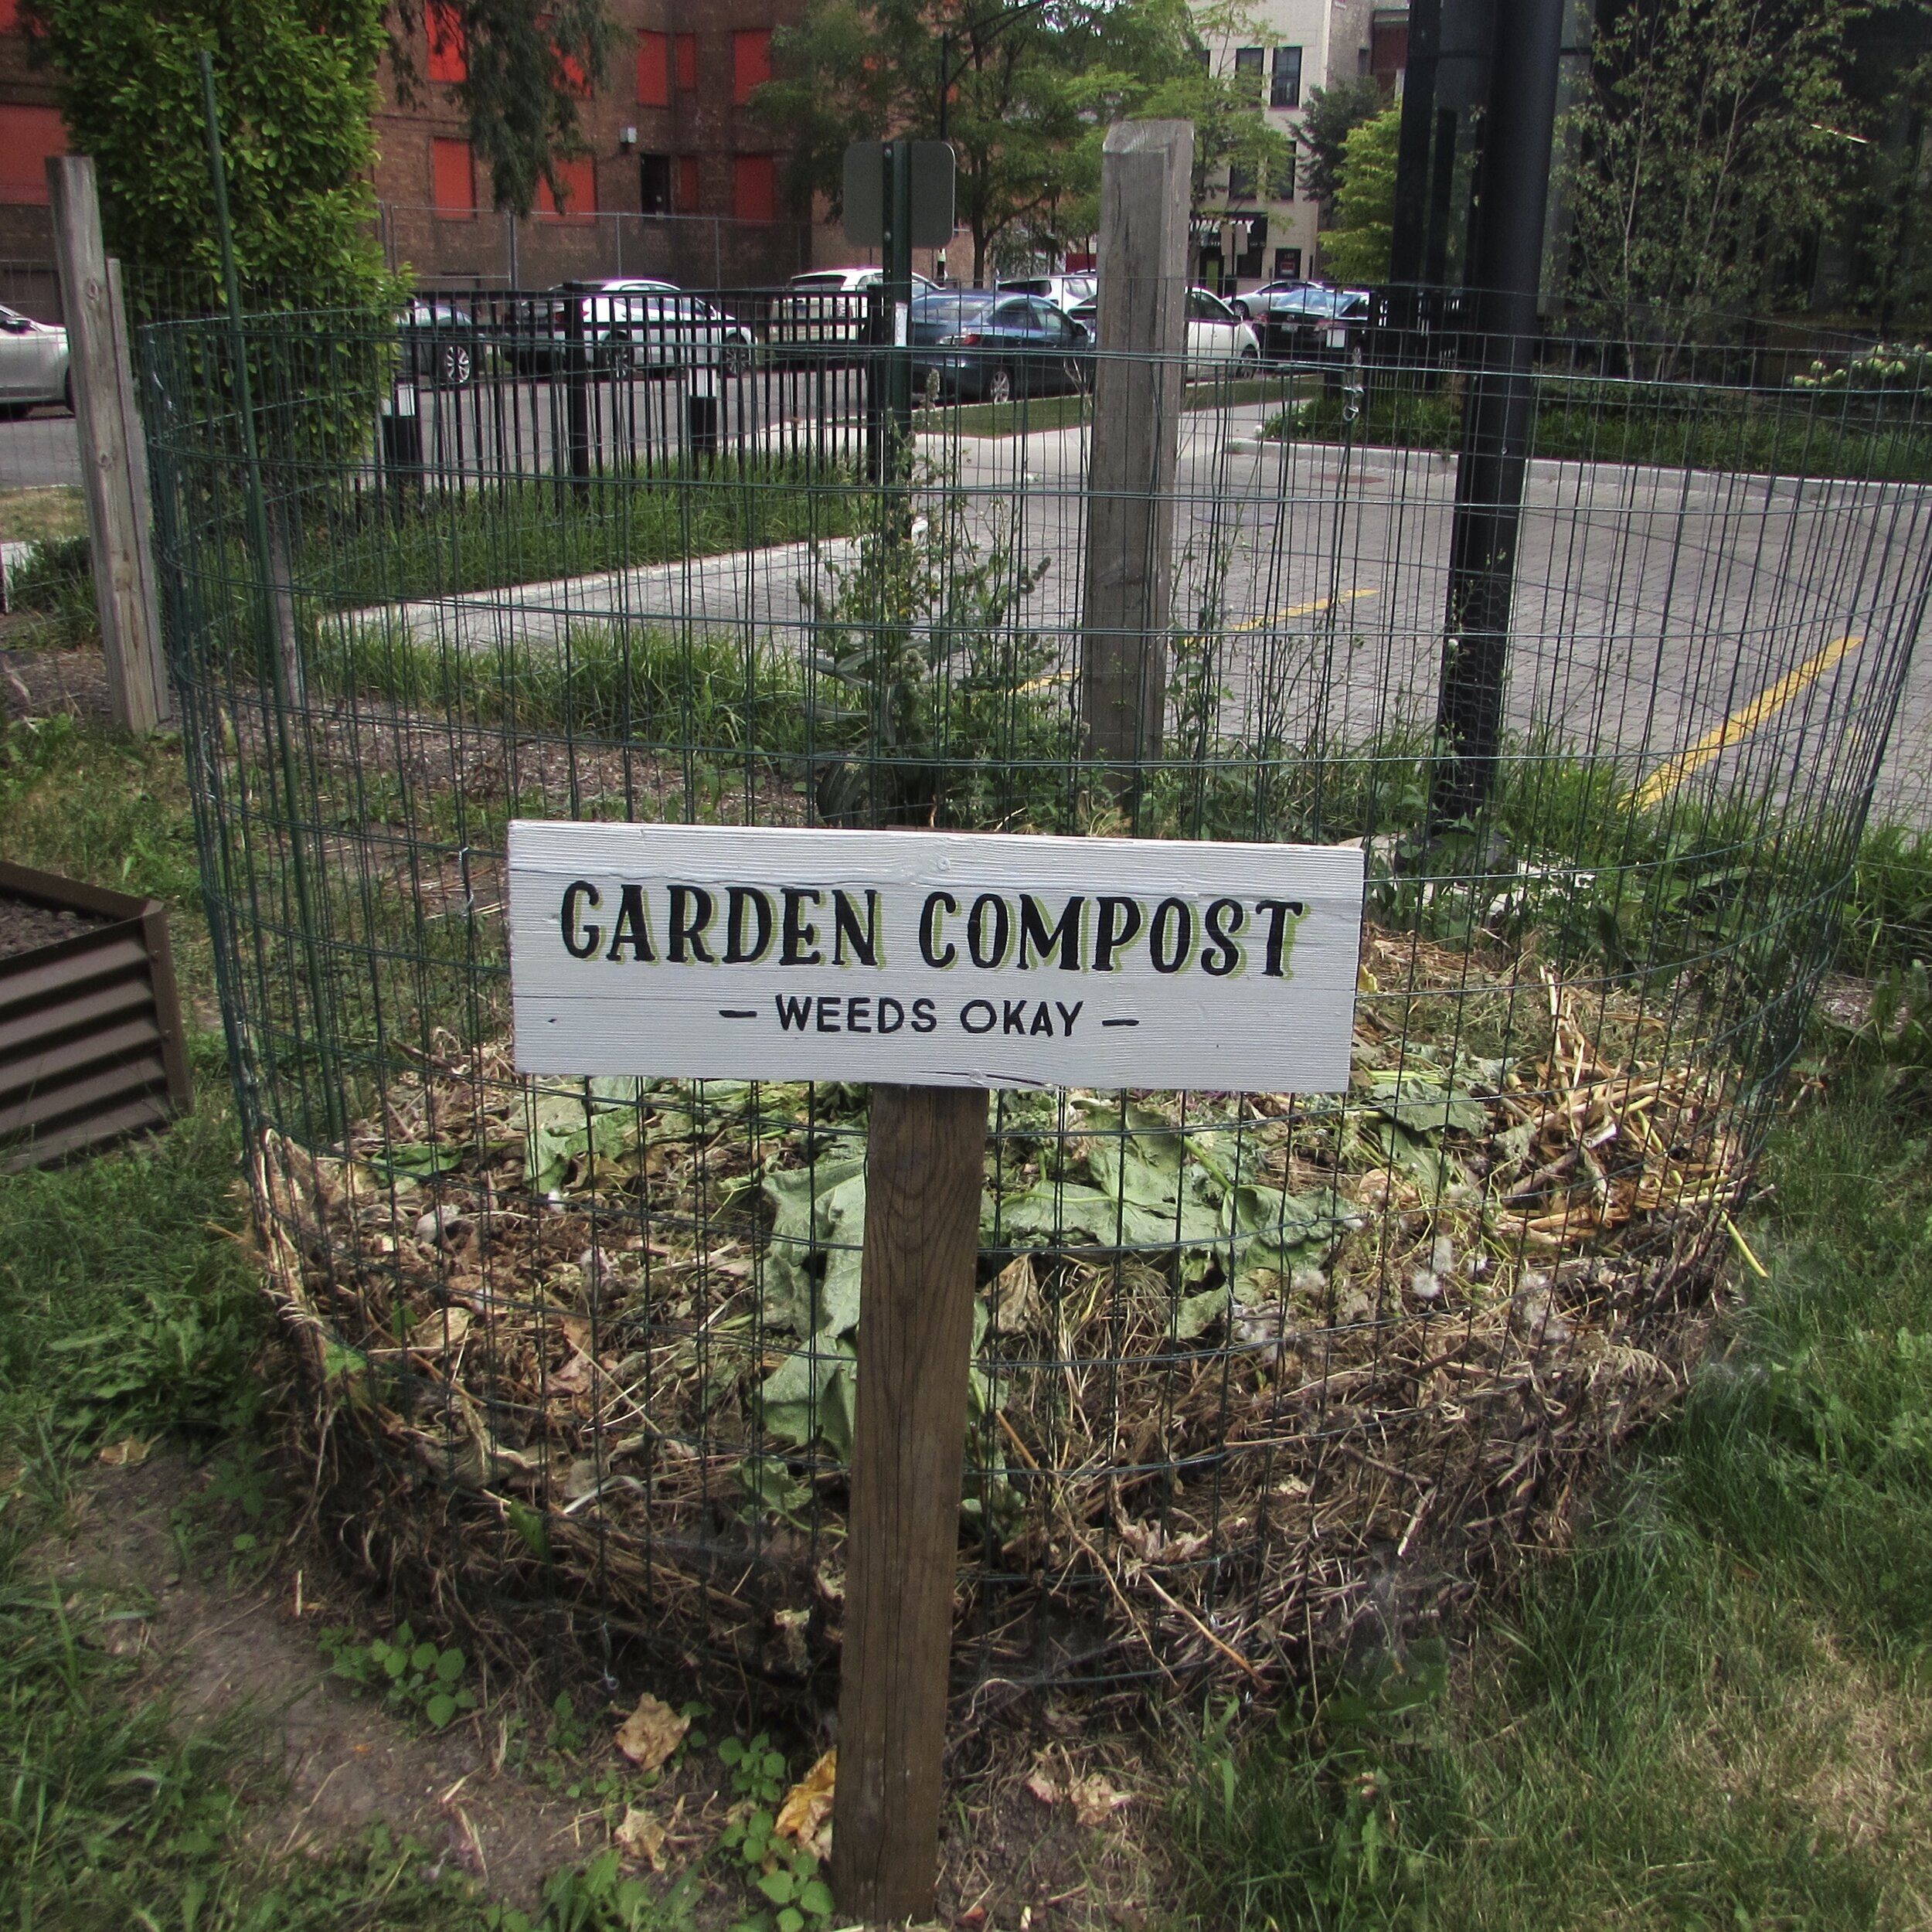  The compost area at Taylor Street Farms welcomes weeds - so long as they’re native, not invasive! 